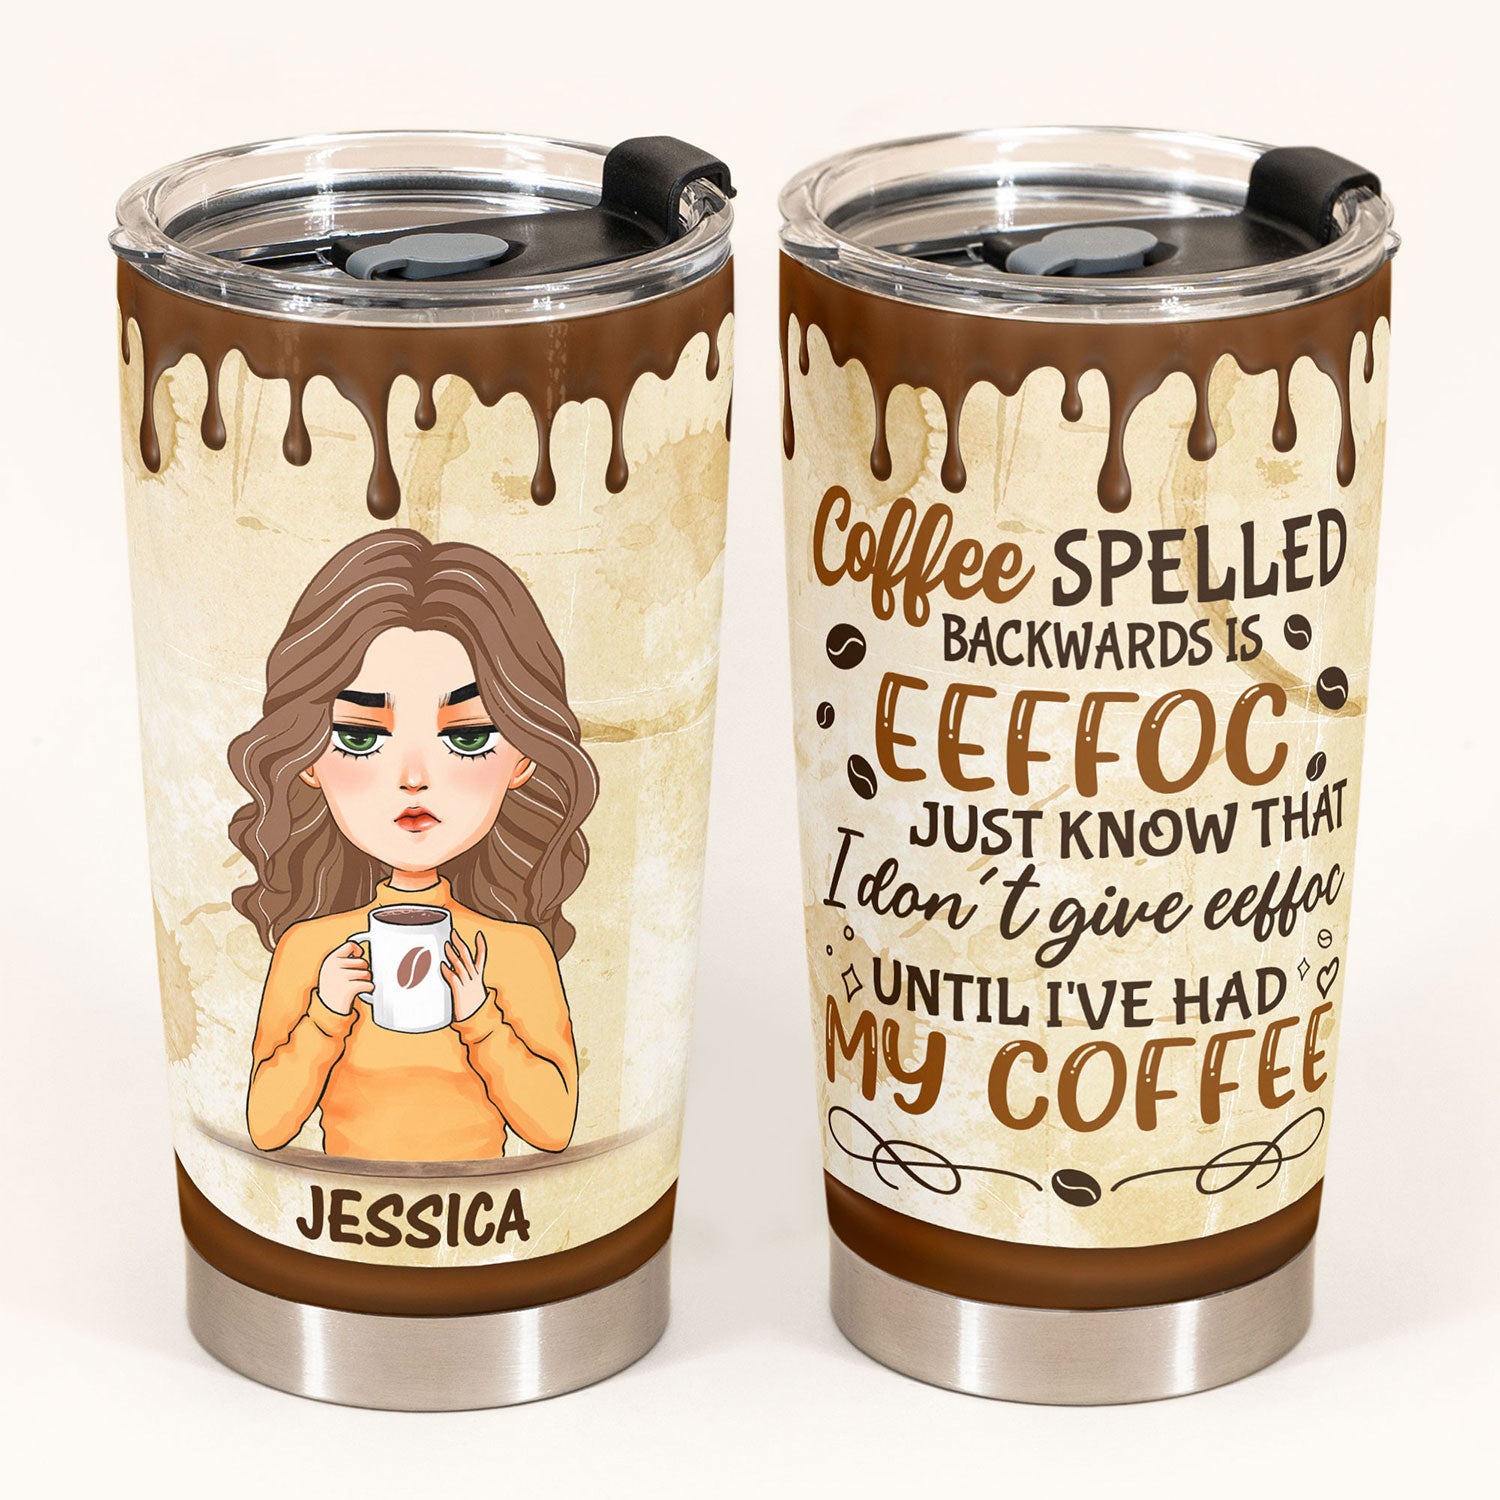 Coffee Spelled Backwards Is Eeffoc - Personalized Mug - Birthday Gift For Coffee Lovers